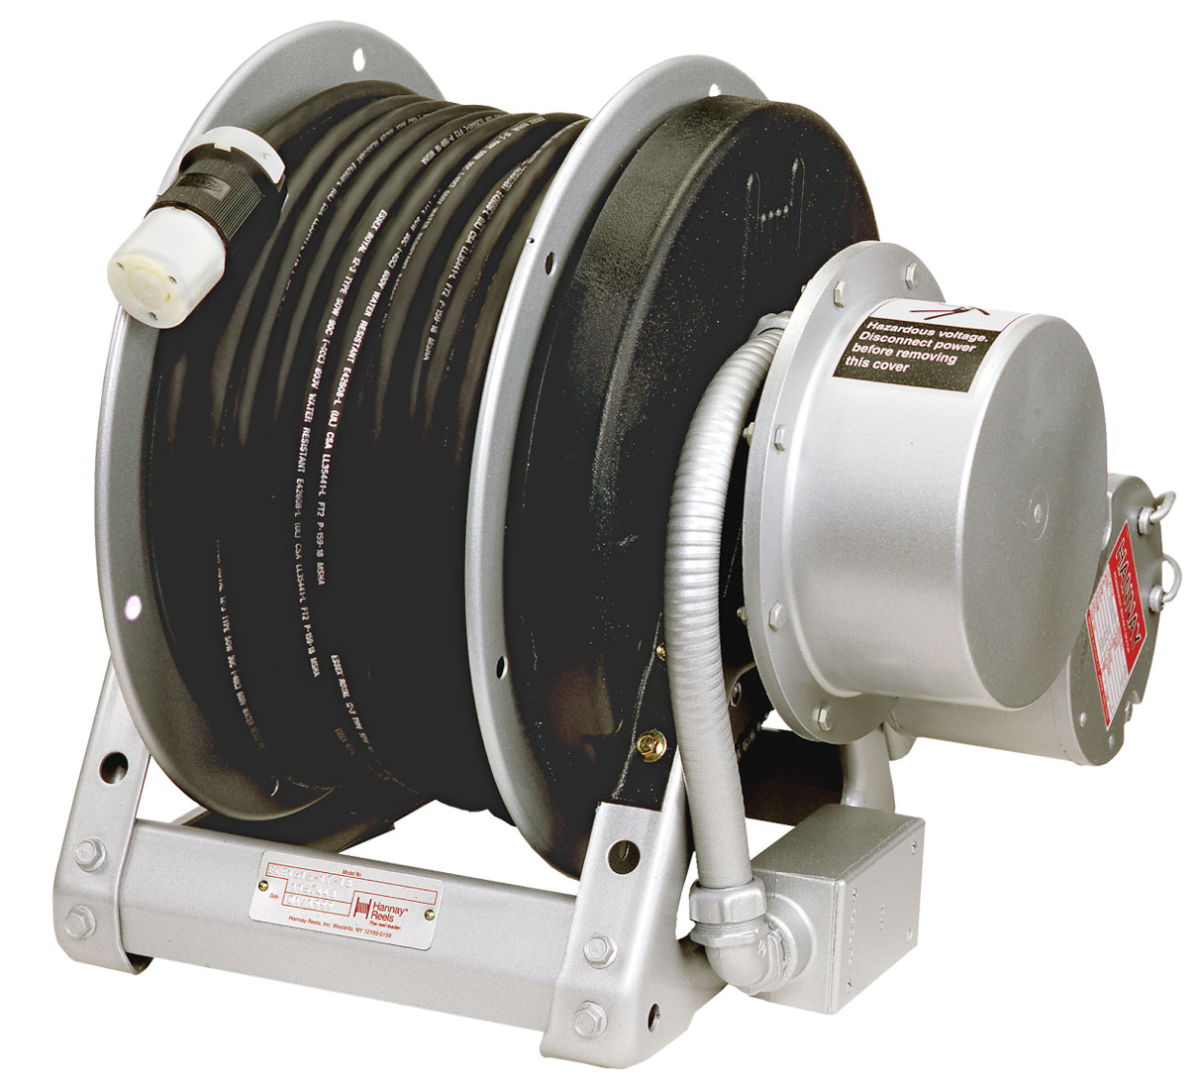 Hose & Cable Reels From Reelcraft, Hannay, Lincoln, Samson +more